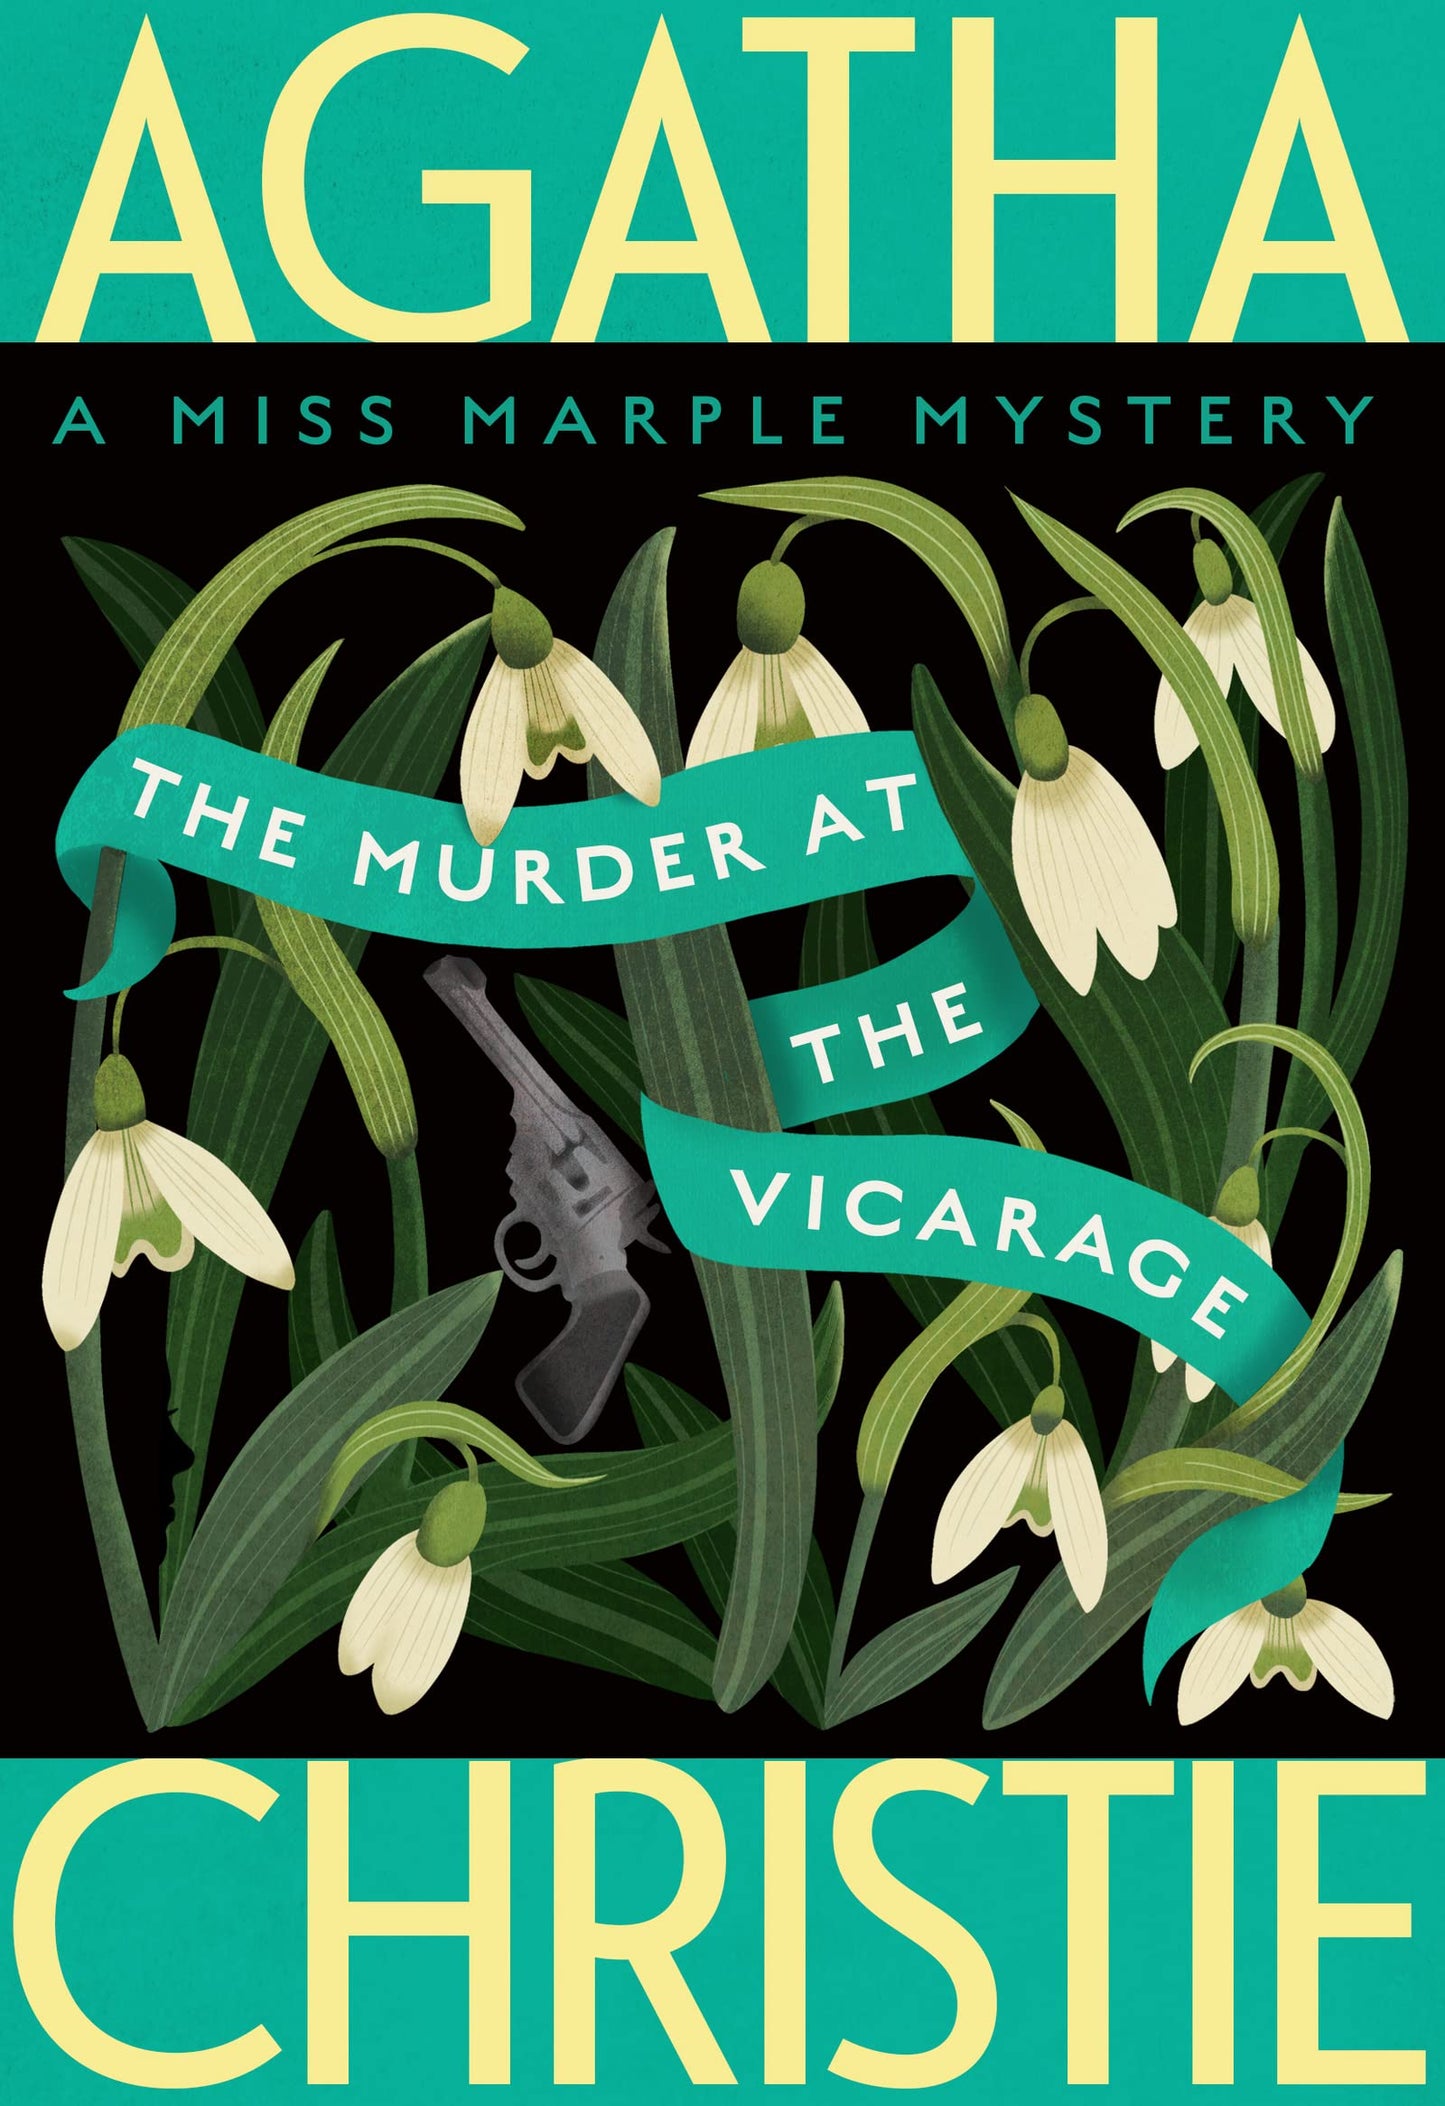 Murder at the Vicarage (Christie - paperback)